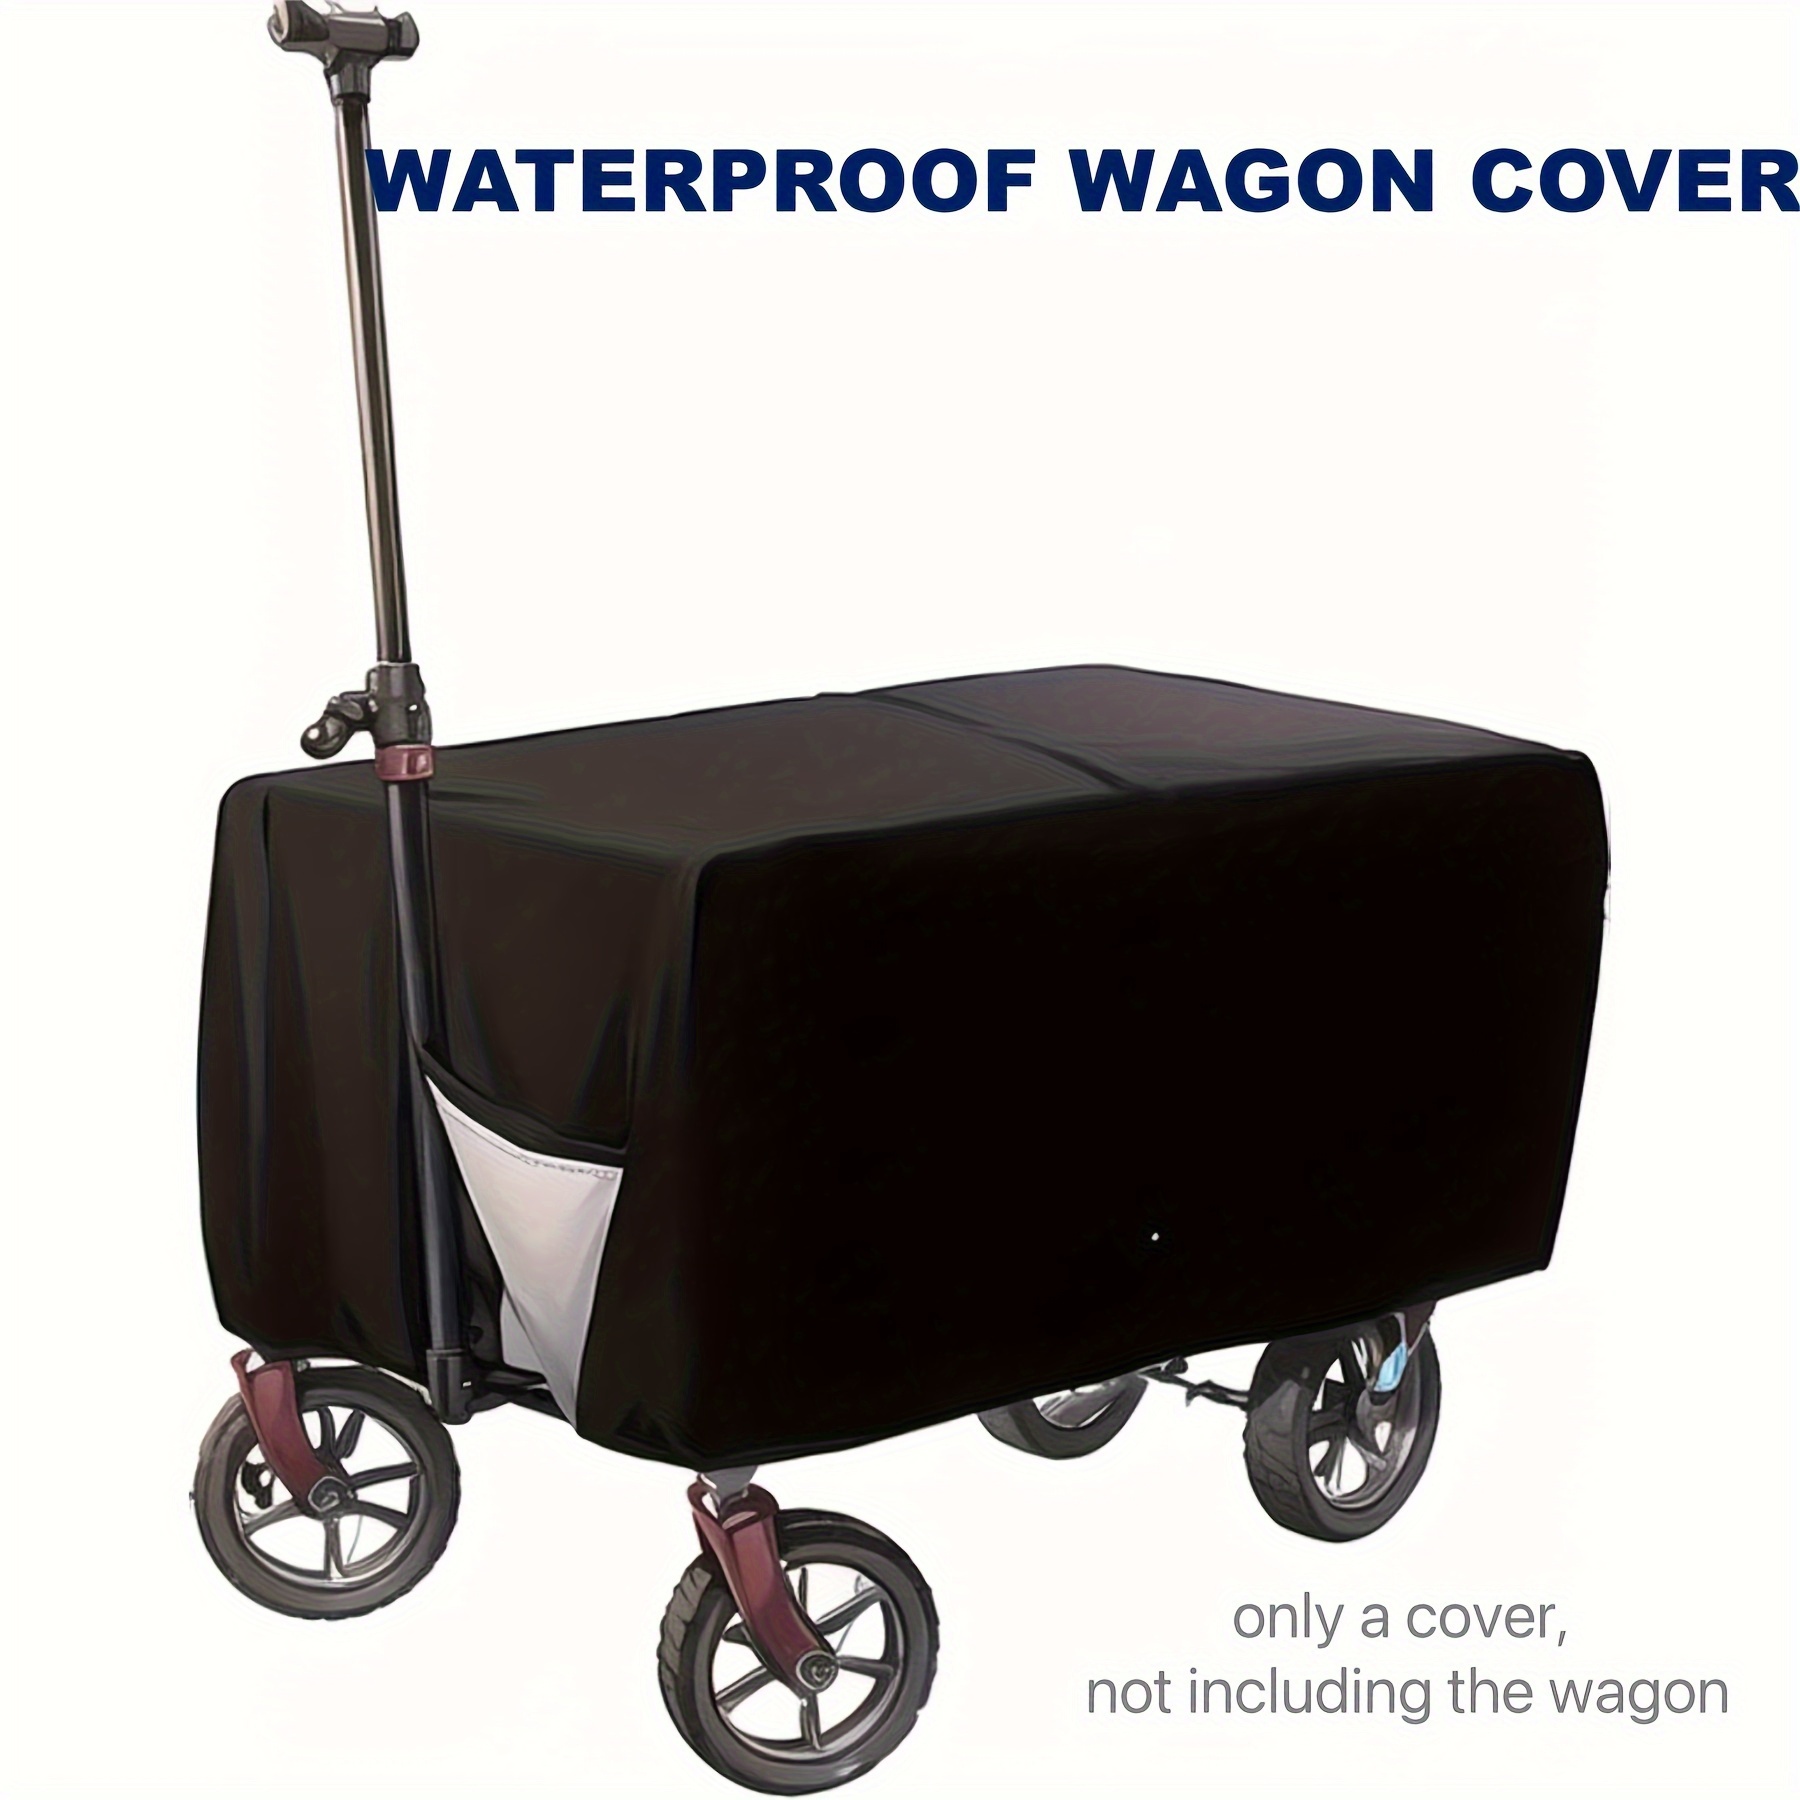 

Waterproof Wagon Cover - Rectangle Drawstring Closure, Pvc Bracket, Oxford Cloth, Water-resistant Rainproof Dustproof Outdoor Camping Accessory For Folding Wagons, Suitable For Ages 14+